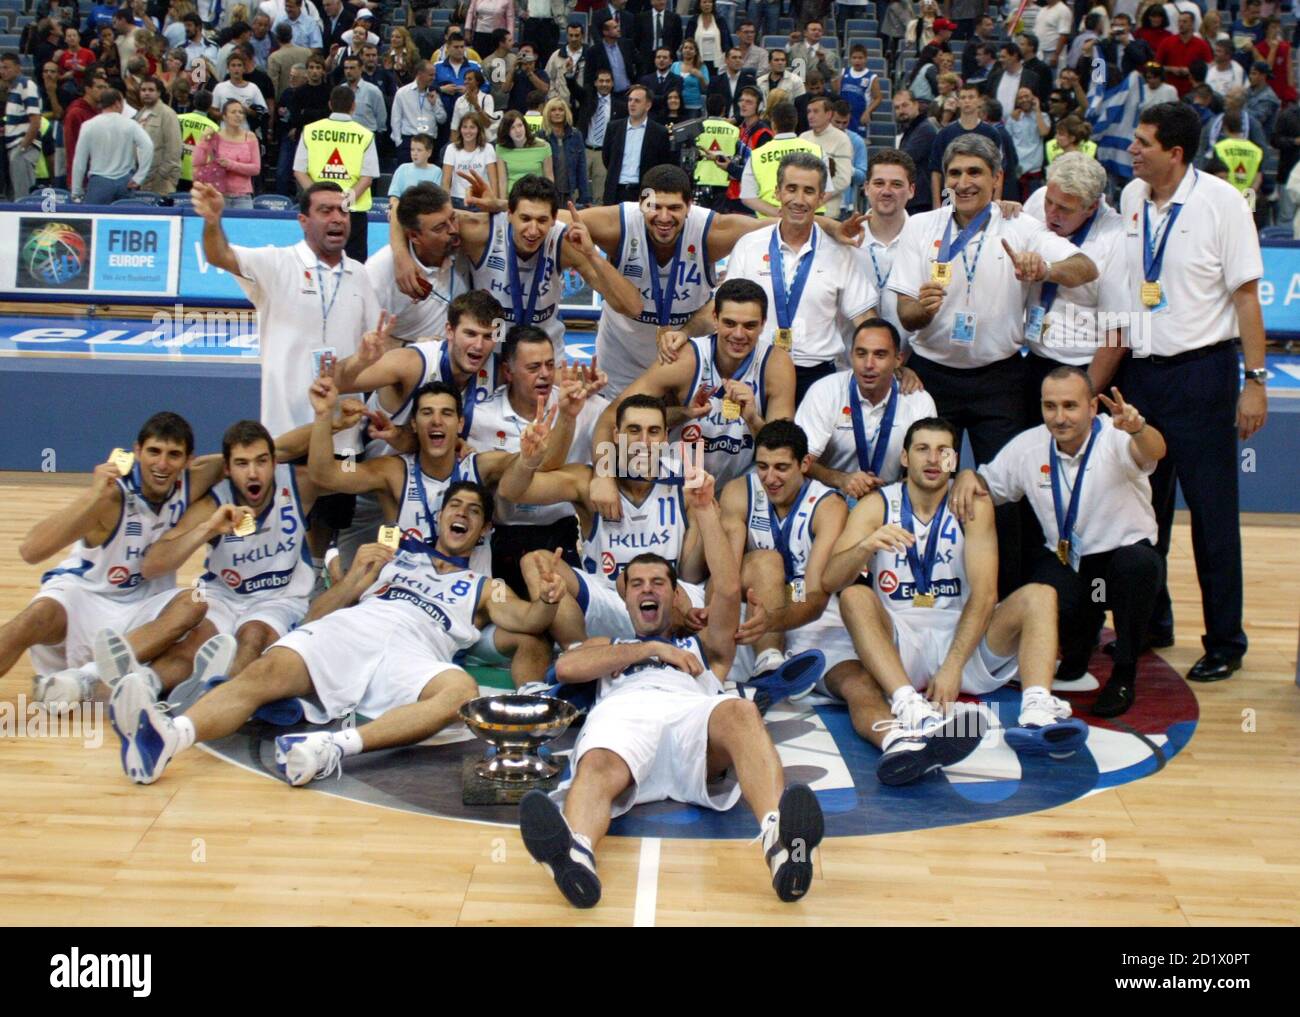 Greece players celebrate with trophy after winning final match of the European  basketball championship in Belgrade, Serbia & Montenegro September 25,  2005. Greece beat Germany 78-62 on Sunday to win their second